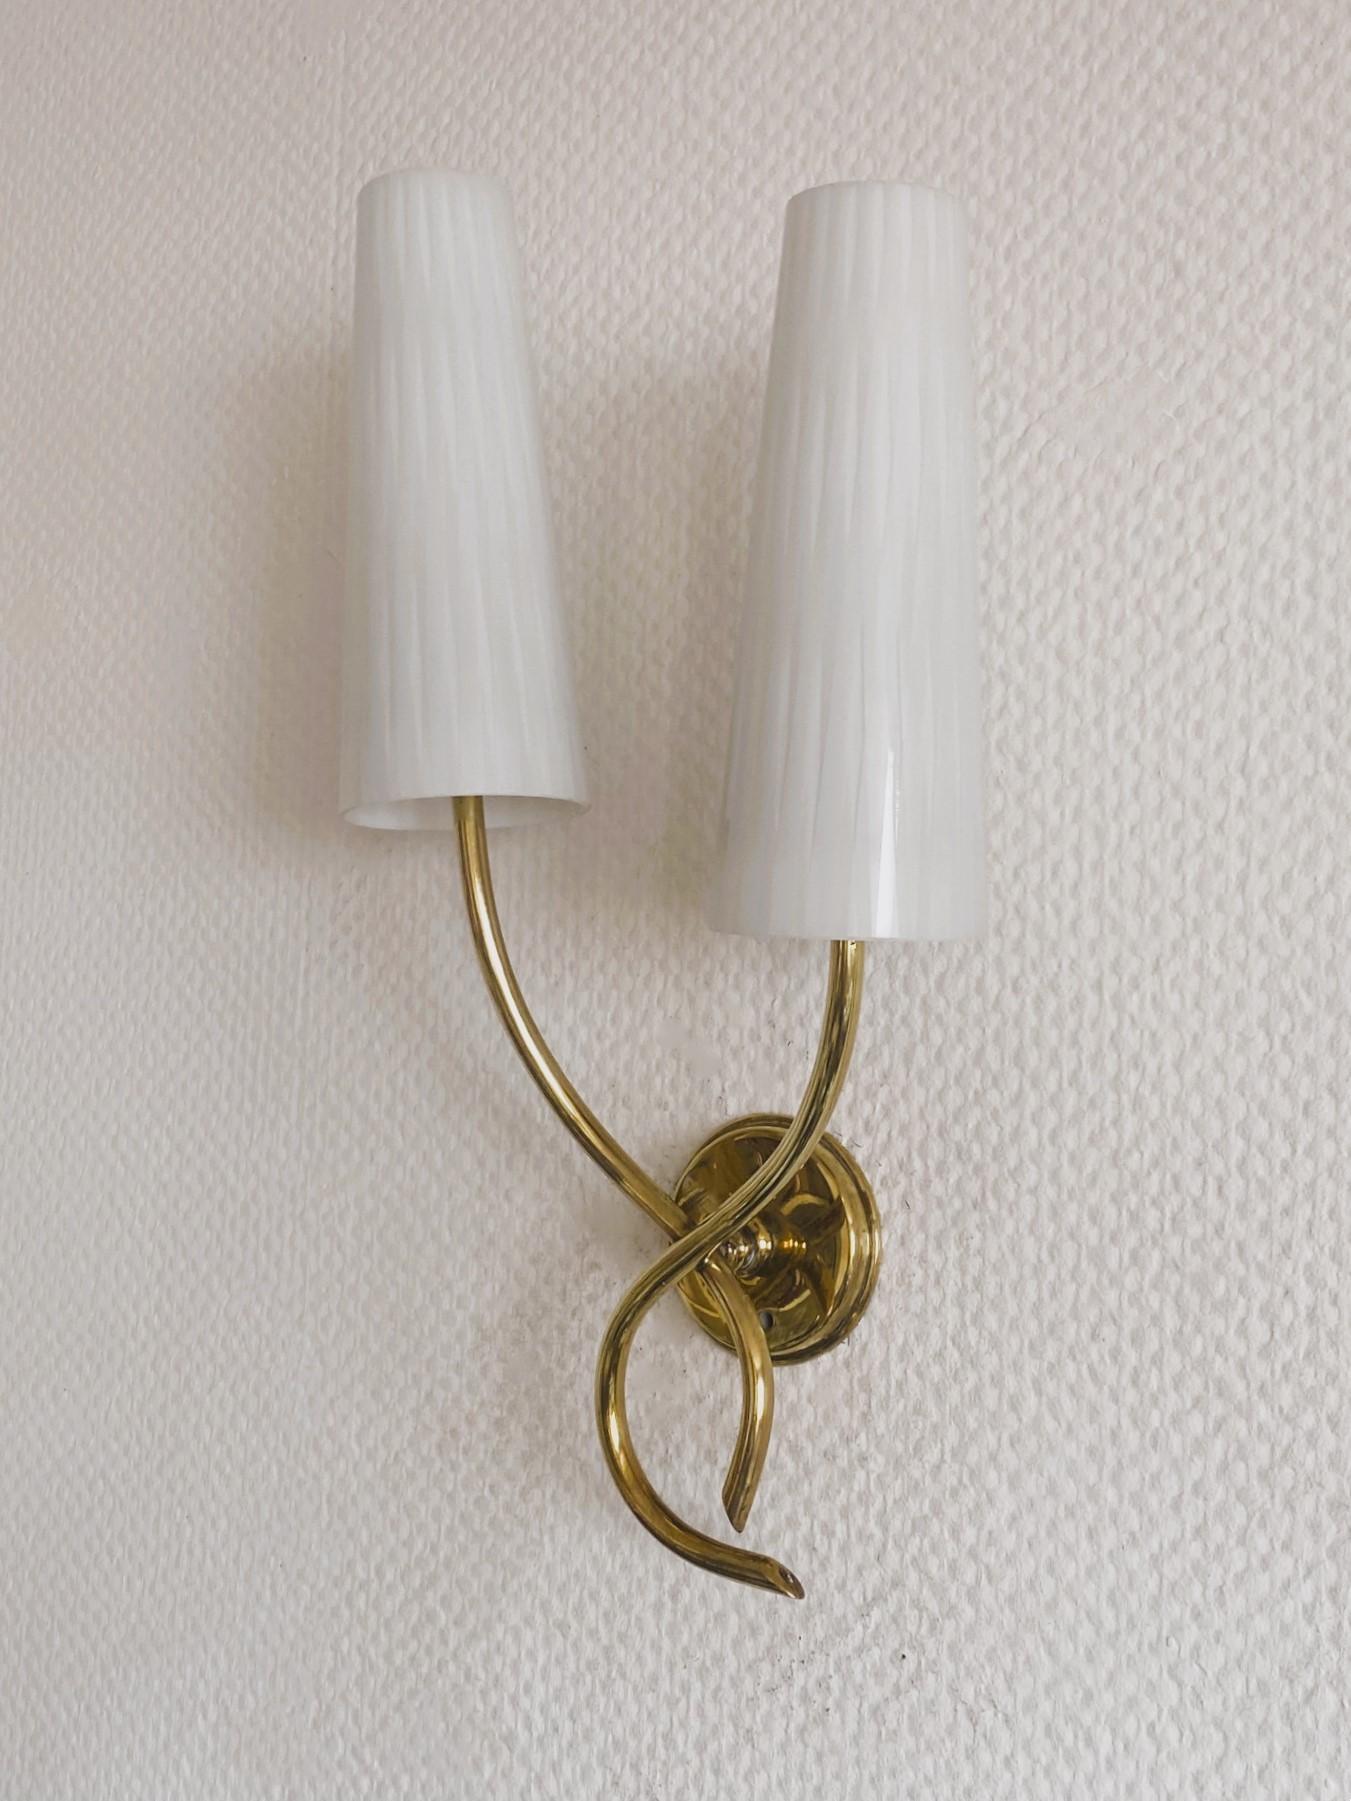 Pair of French Maison Lunel Brass Opal Glass Two-Light Wall Sconces, 1950s For Sale 3